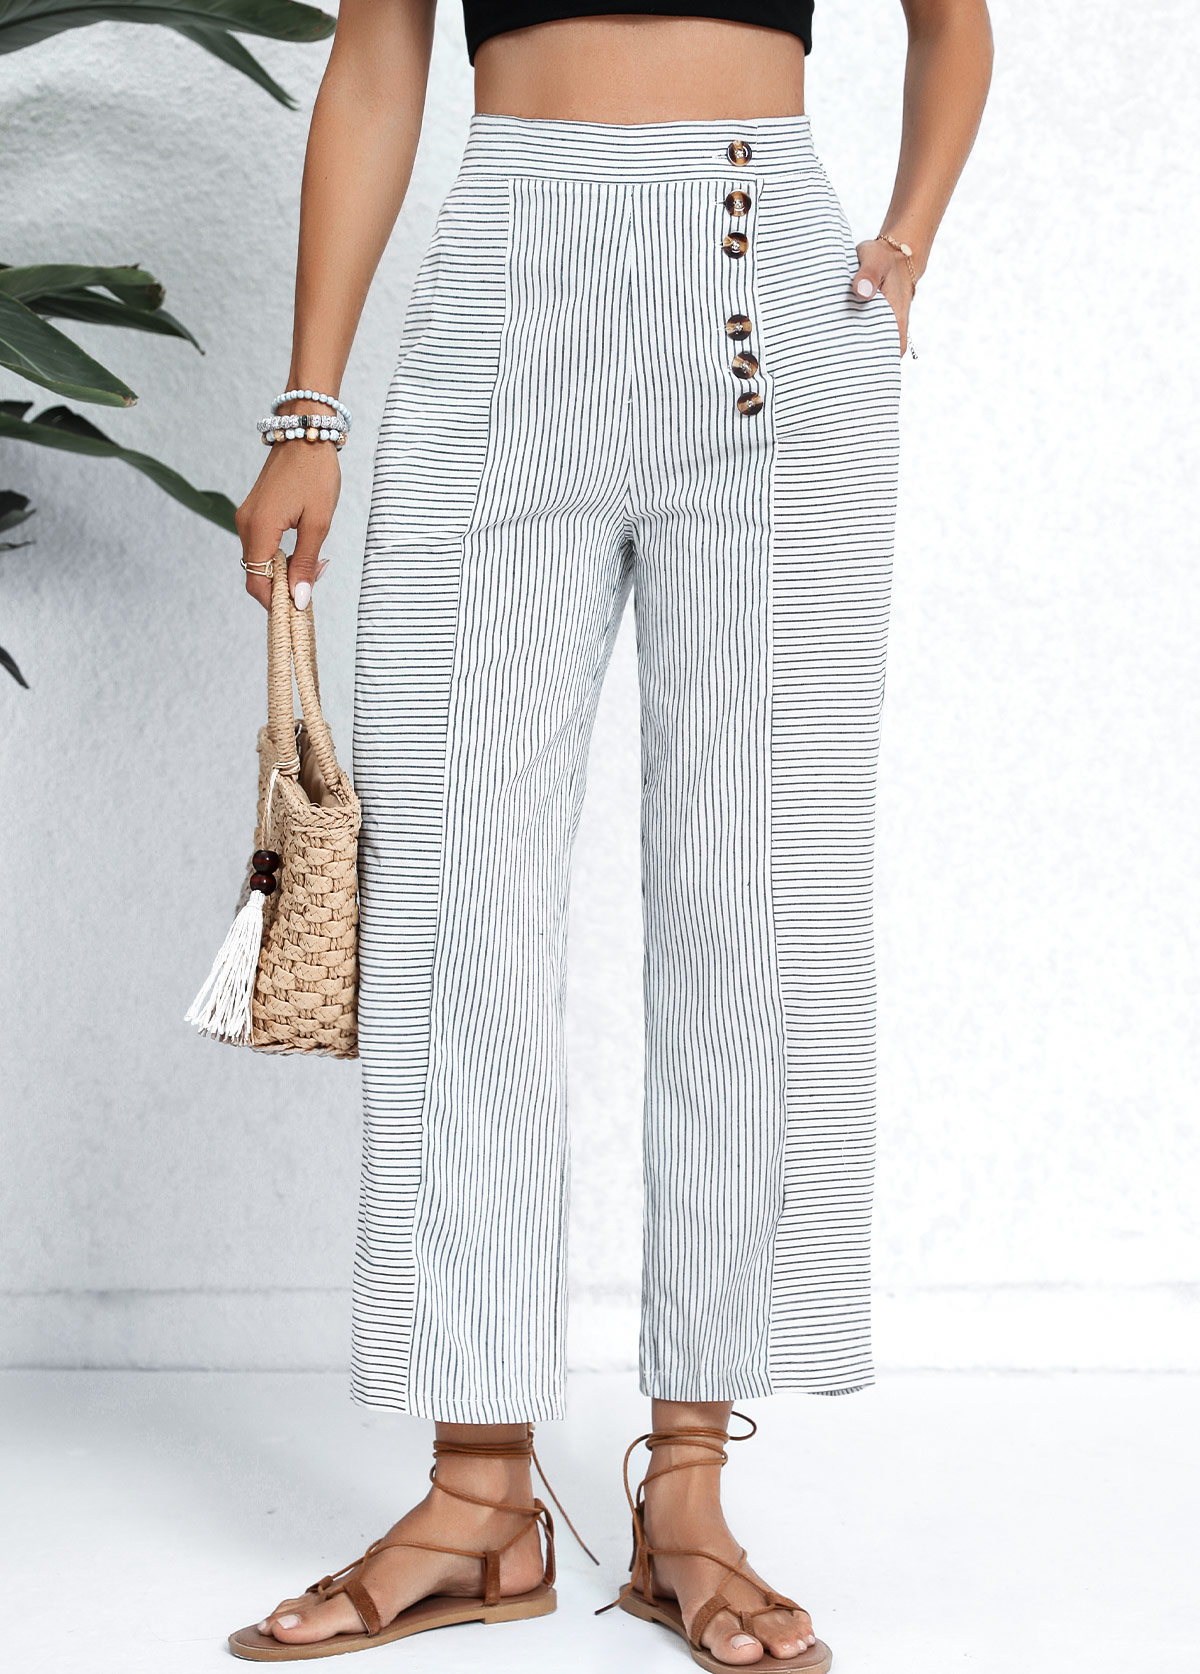 White Pocket Striped Button Fly High Waisted Pants